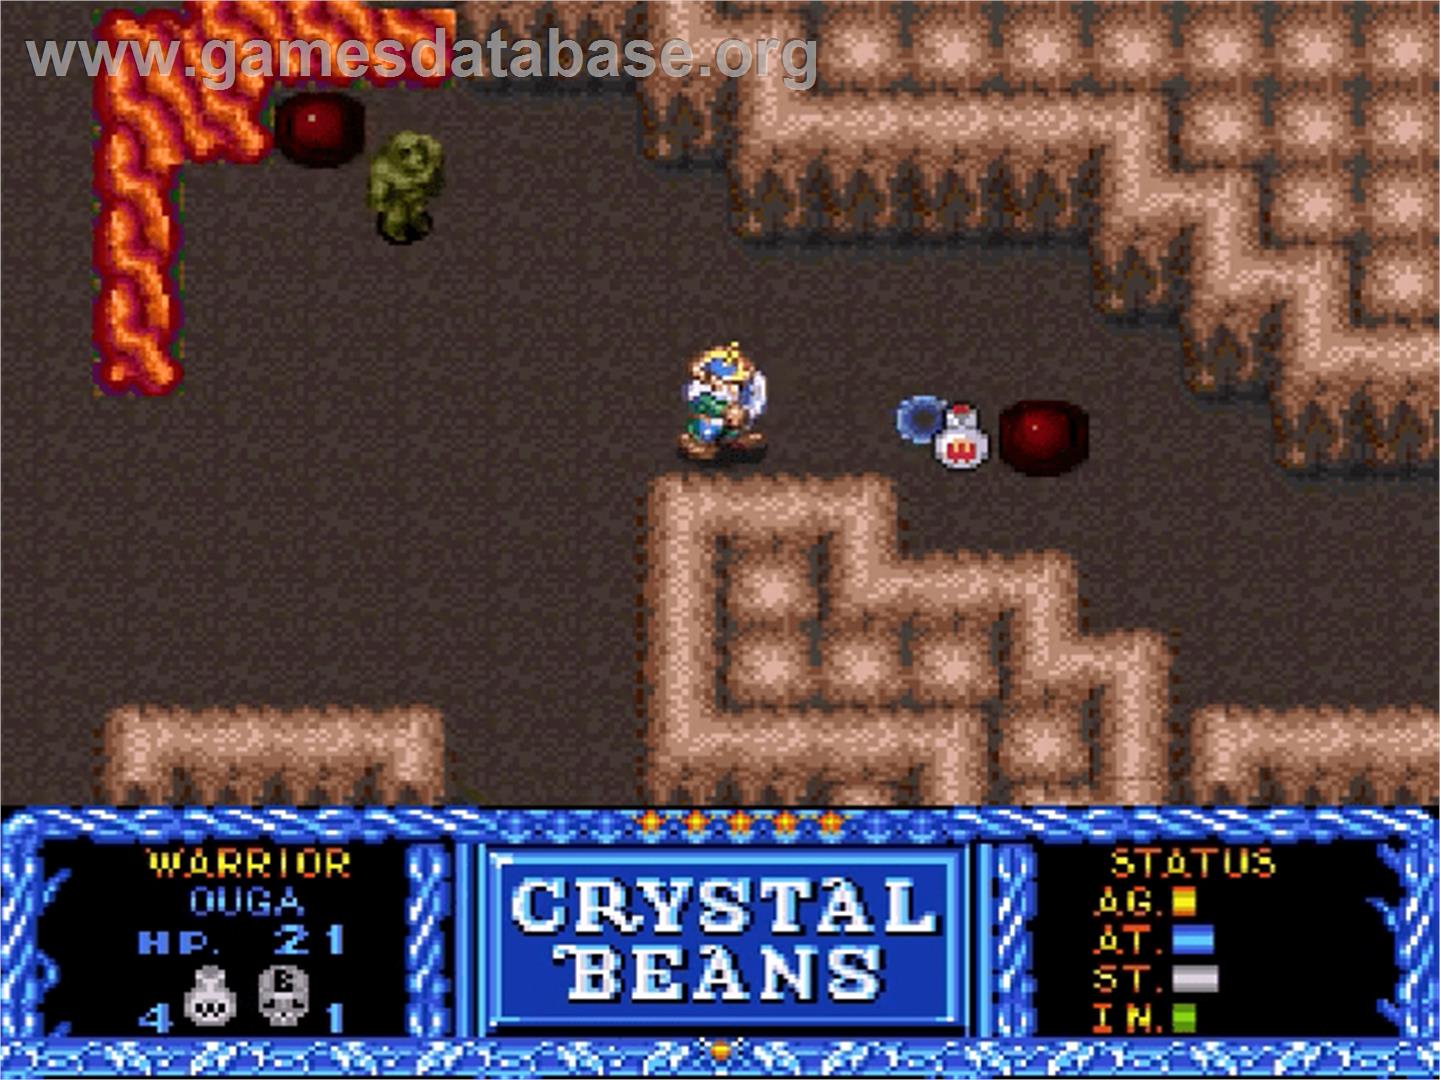 Crystal Beans From Dungeon Explorer - Nintendo SNES - Artwork - In Game